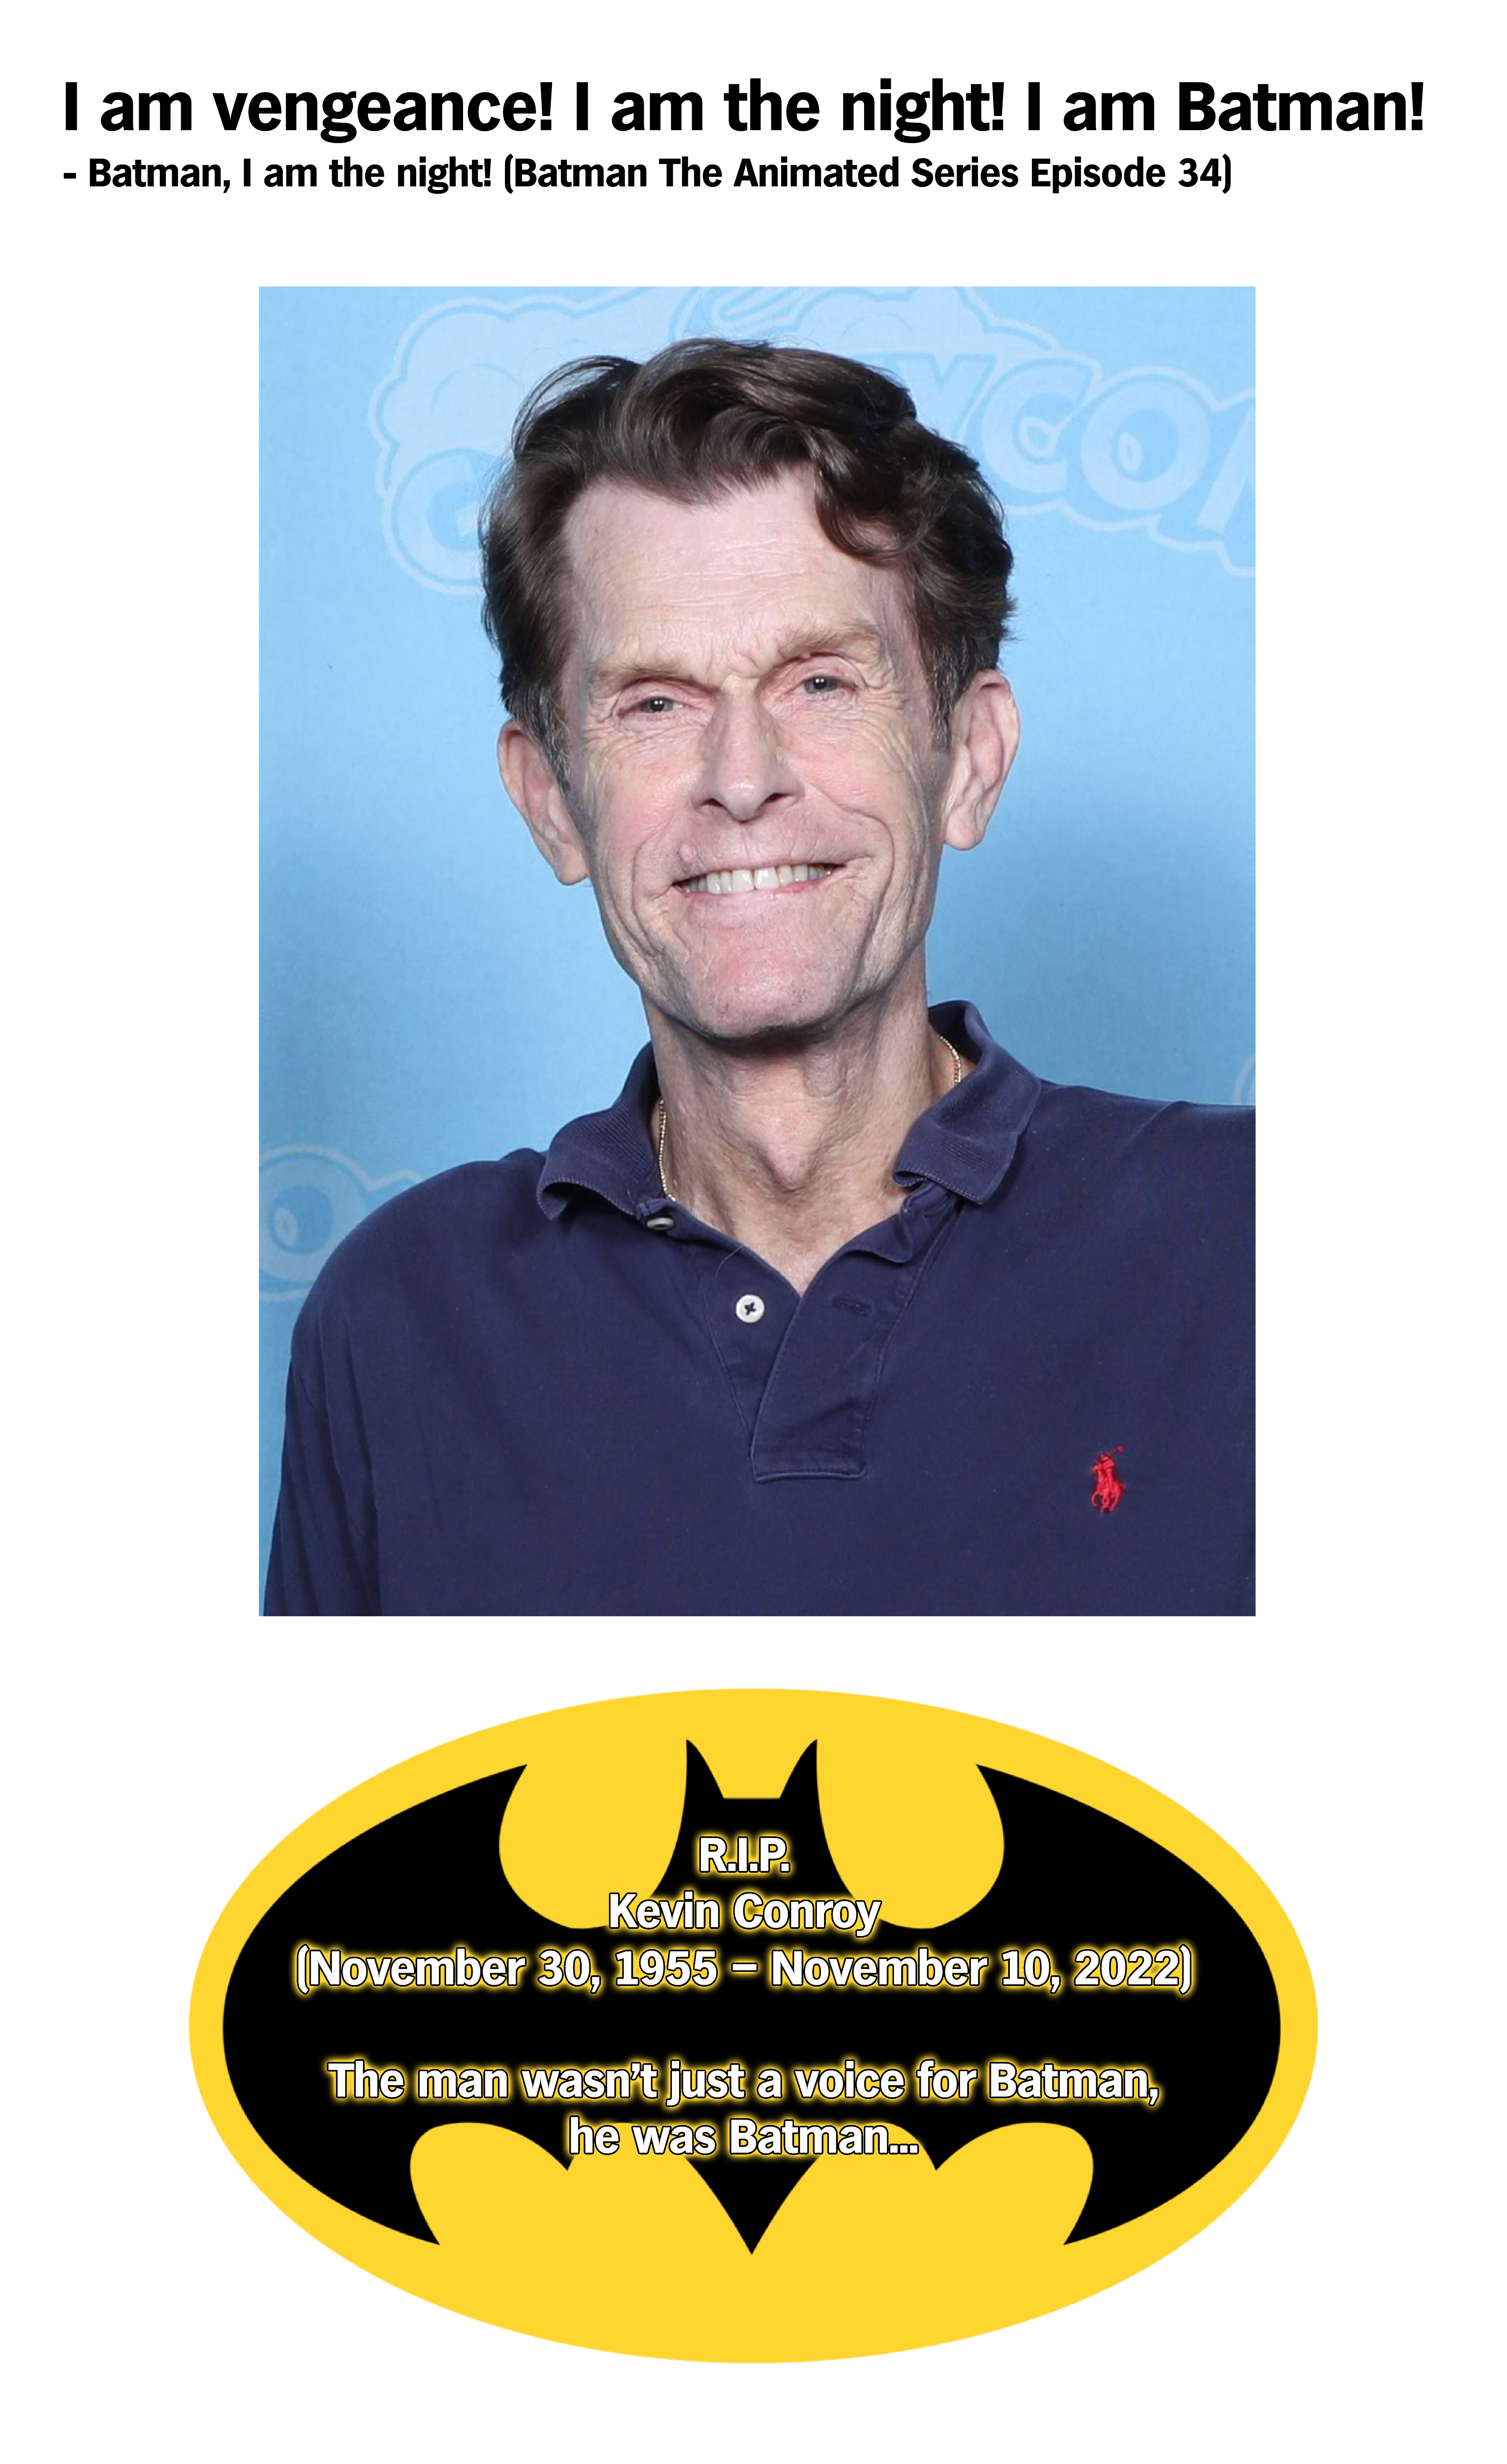 File:Kevin Conroy (34959287275).jpg - Wikimedia Commons